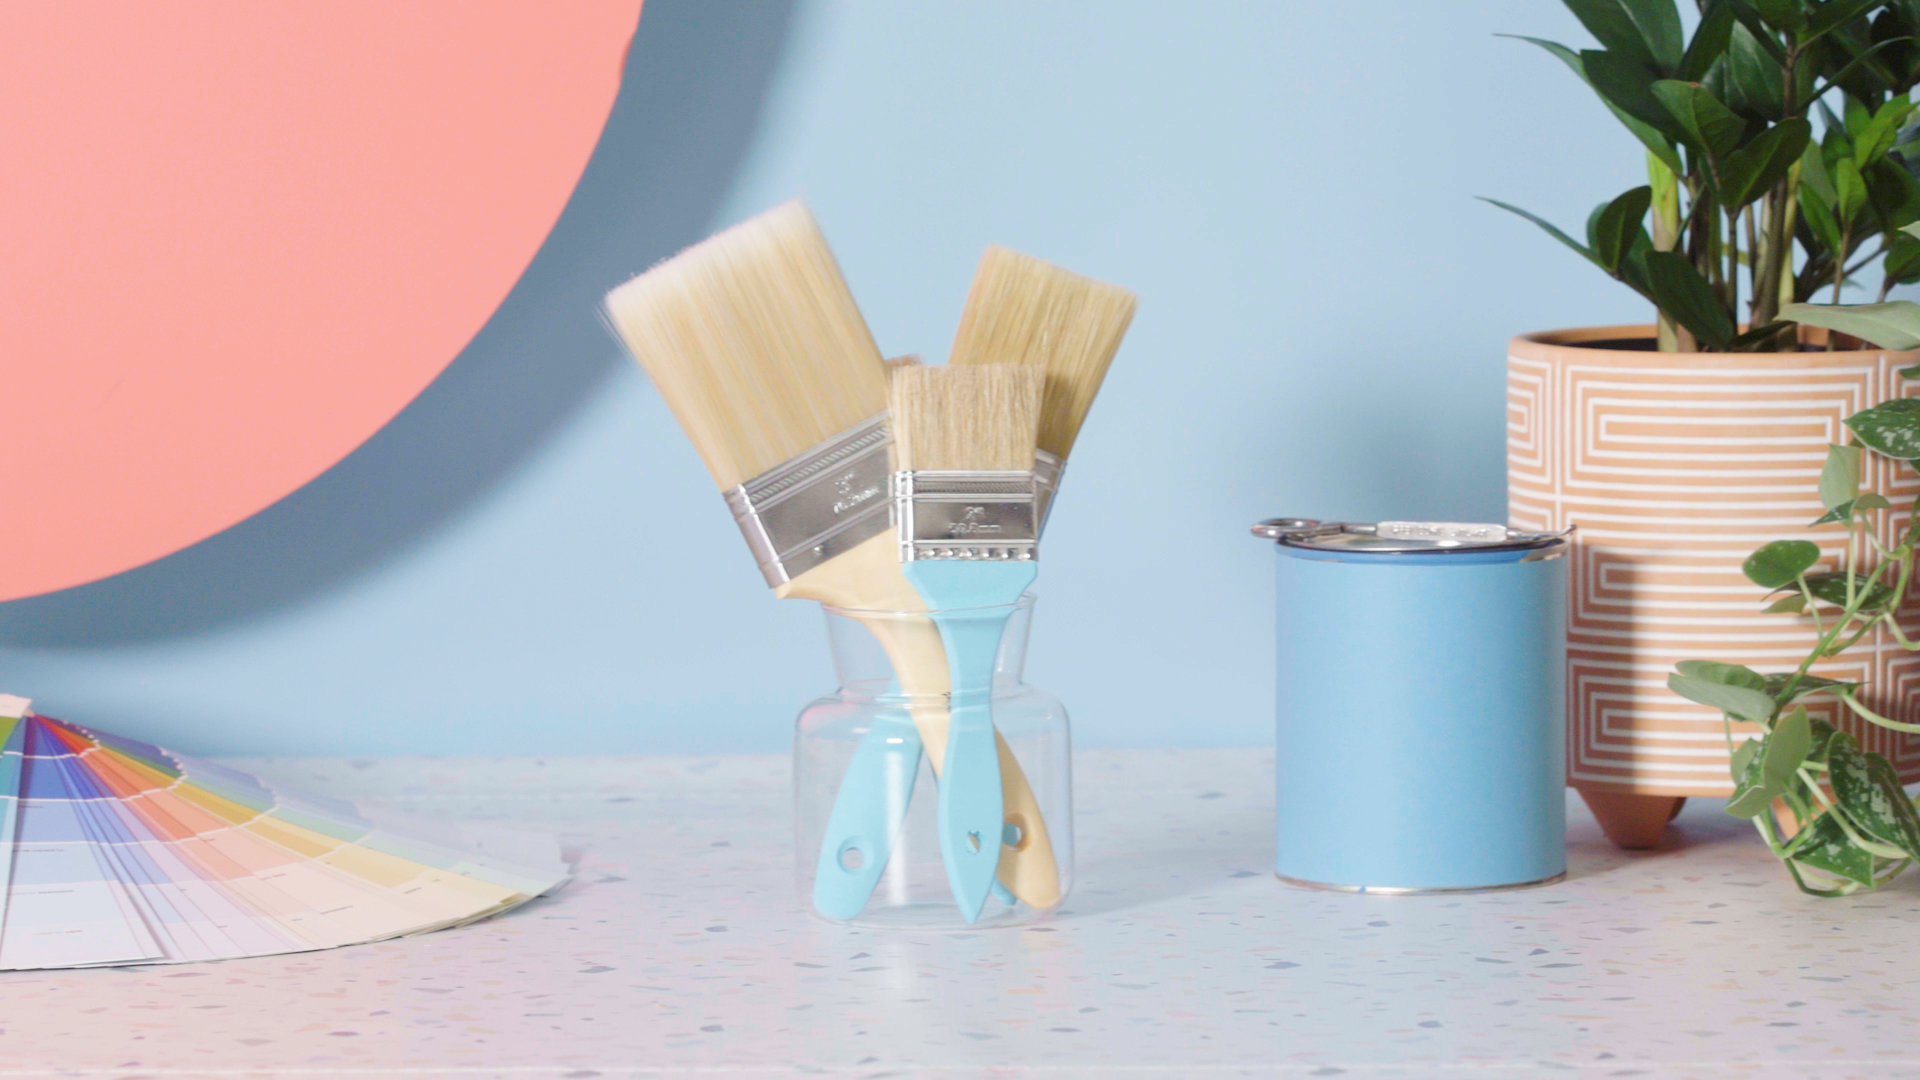 How to Clean Paint Brushes in 2022